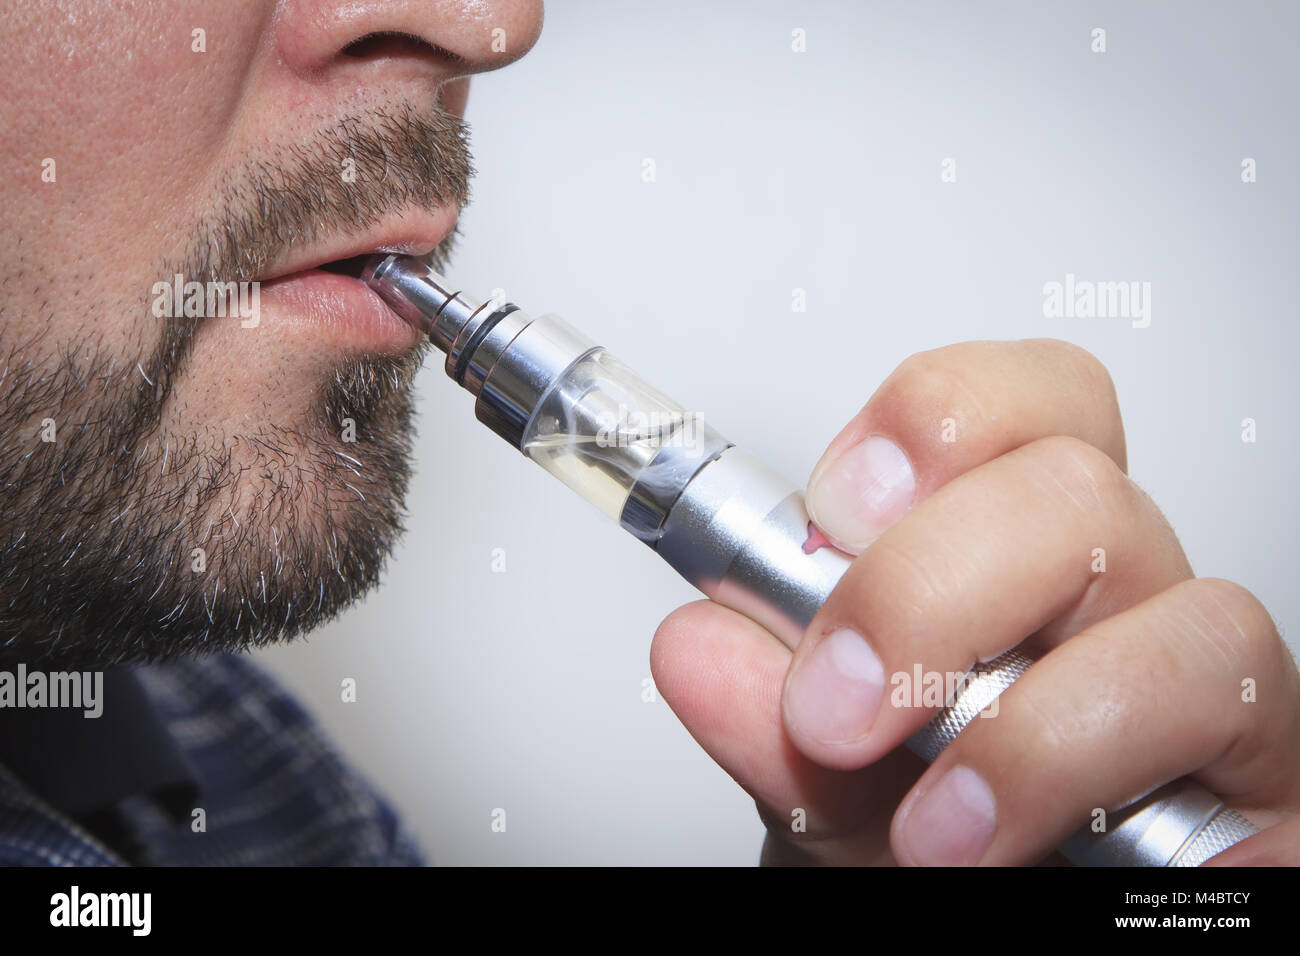 Profile view of man smoking electronic sigarette close up Stock Photo